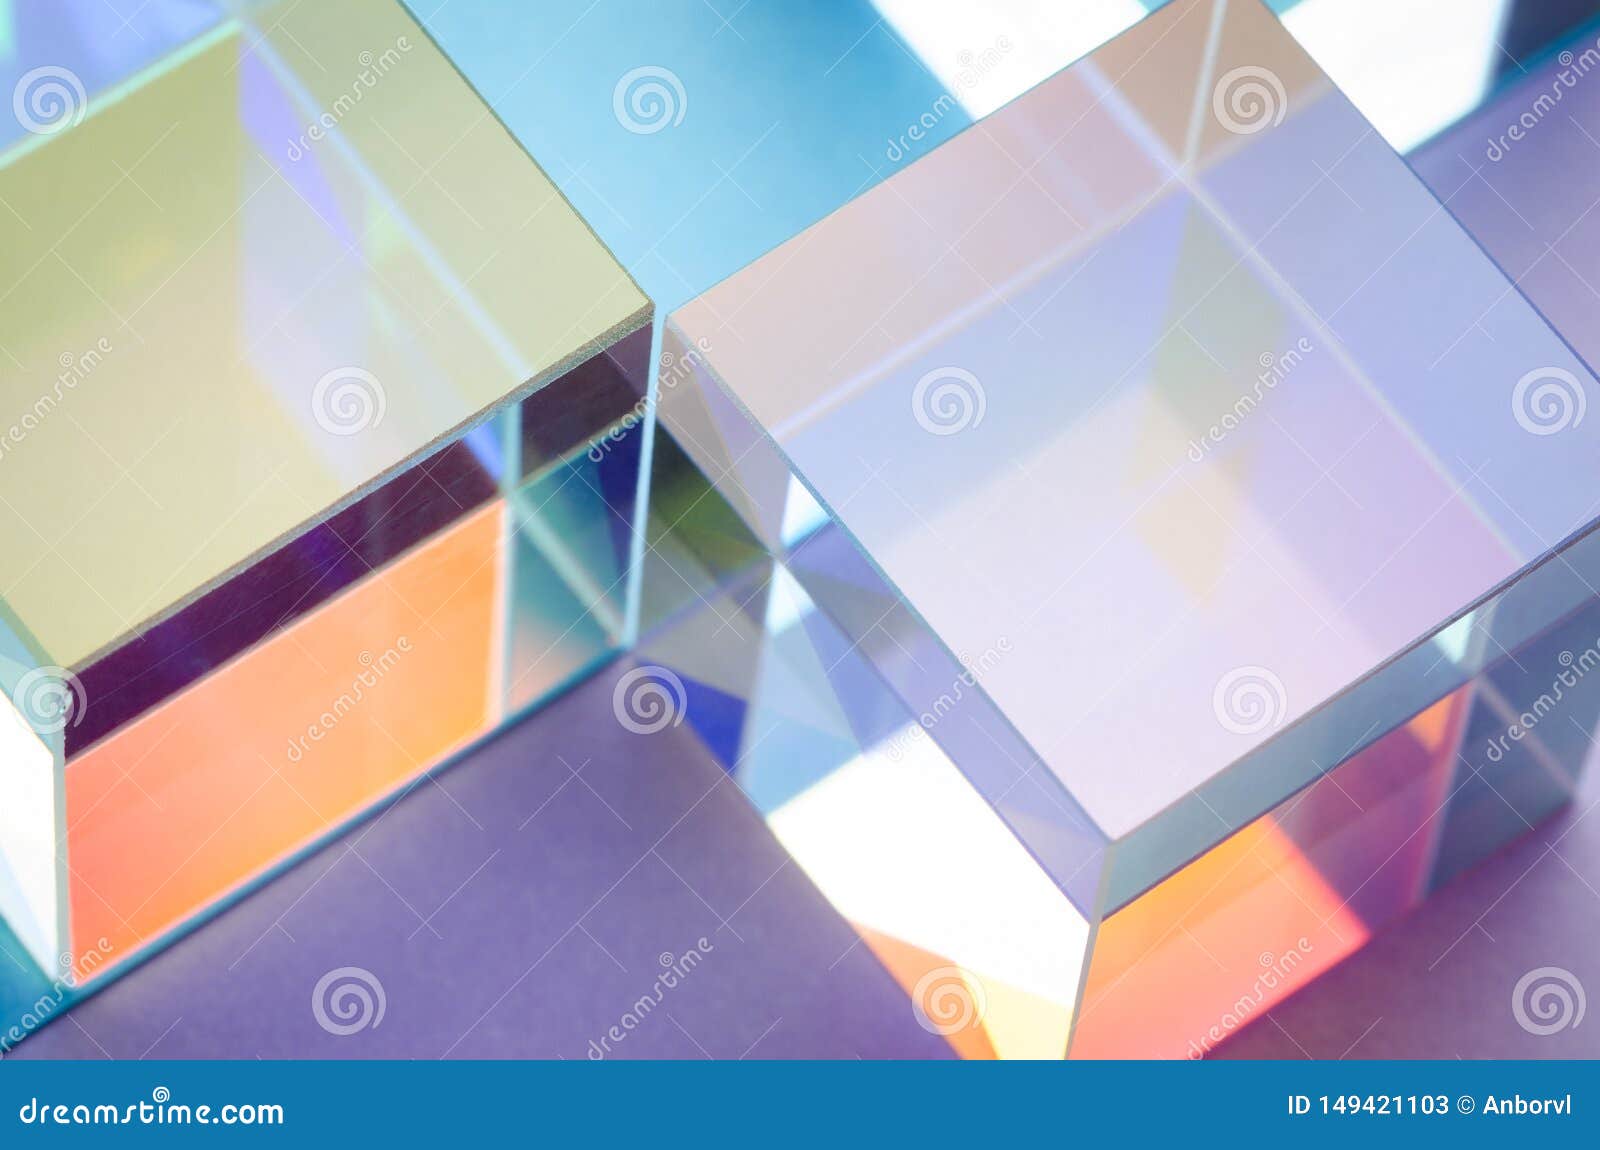 multi-colored glowing glass cubes symmetry, abstract colorful background